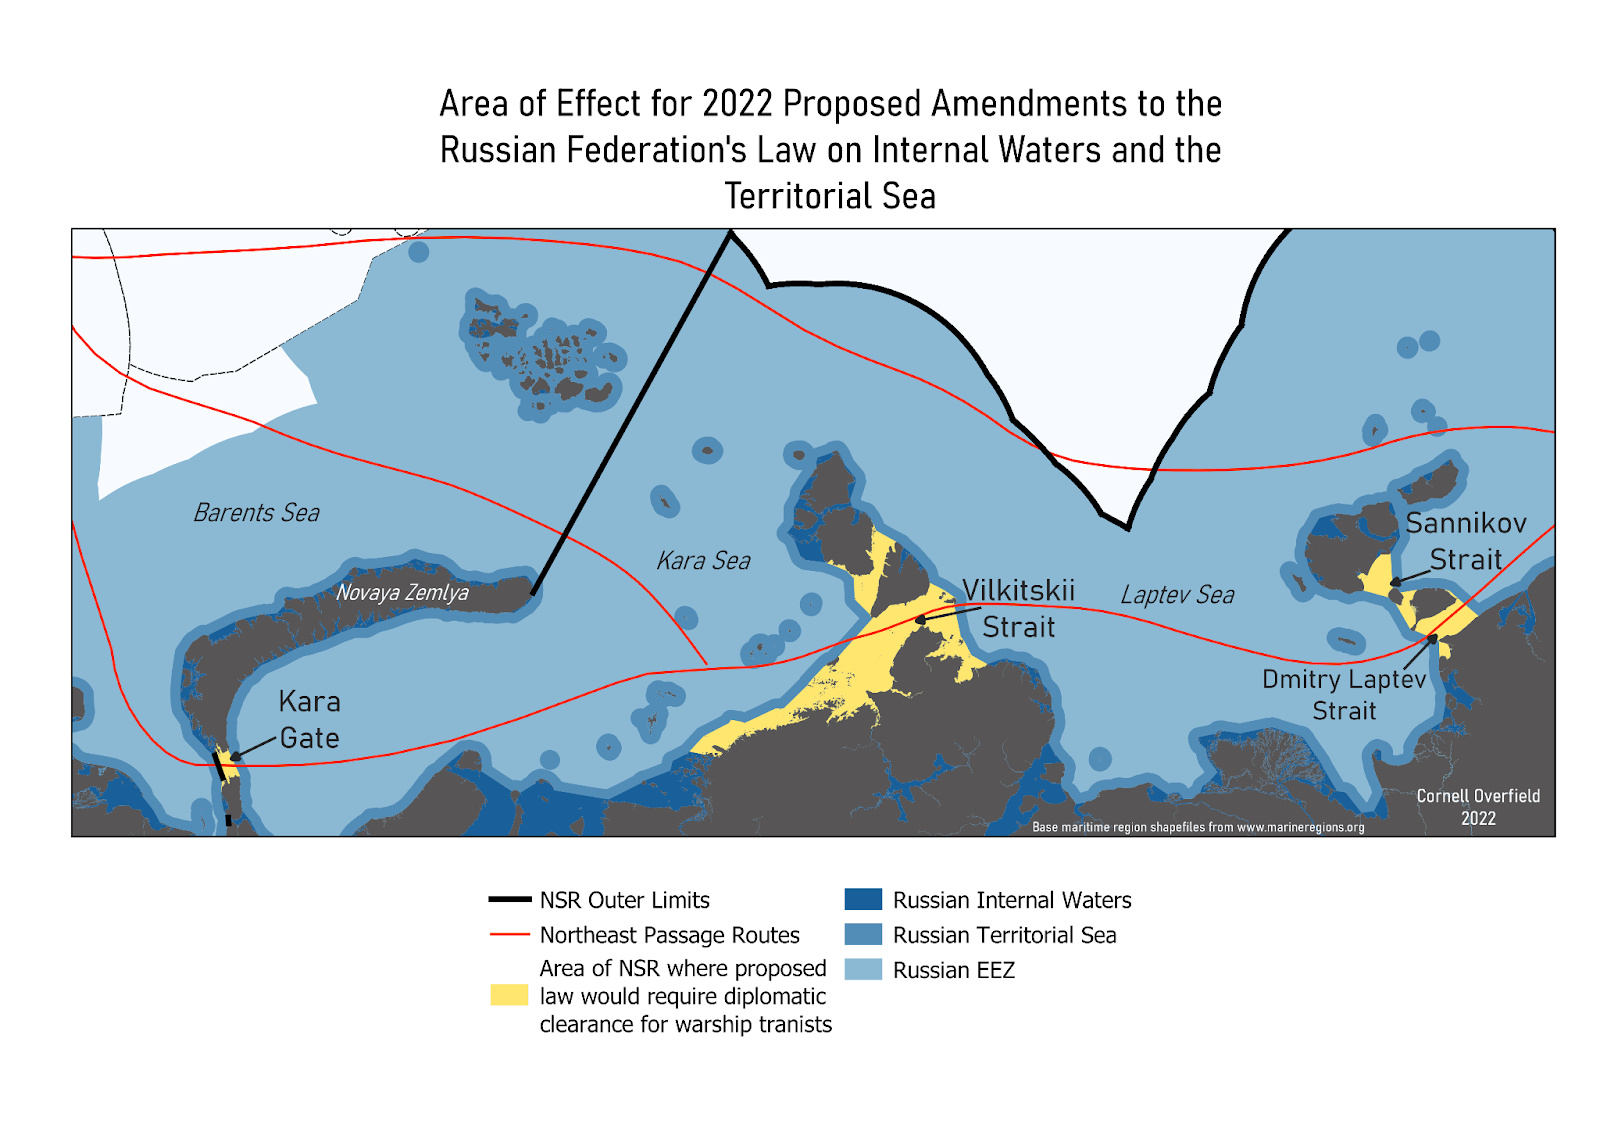 This figure highlights in yellow the areas of the Northern Sea Route that would be affected by the proposed amendment imposing restrictions on navigation by foreign warships. These areas are the Kara Gate, Vilkitskii Strait, and Sannikov and Dmitry Laptev straits. The map shows the unaffected areas with shades of blue denoting the exclusive economic zone (EEZ), territorial sea, and the internal waters. 